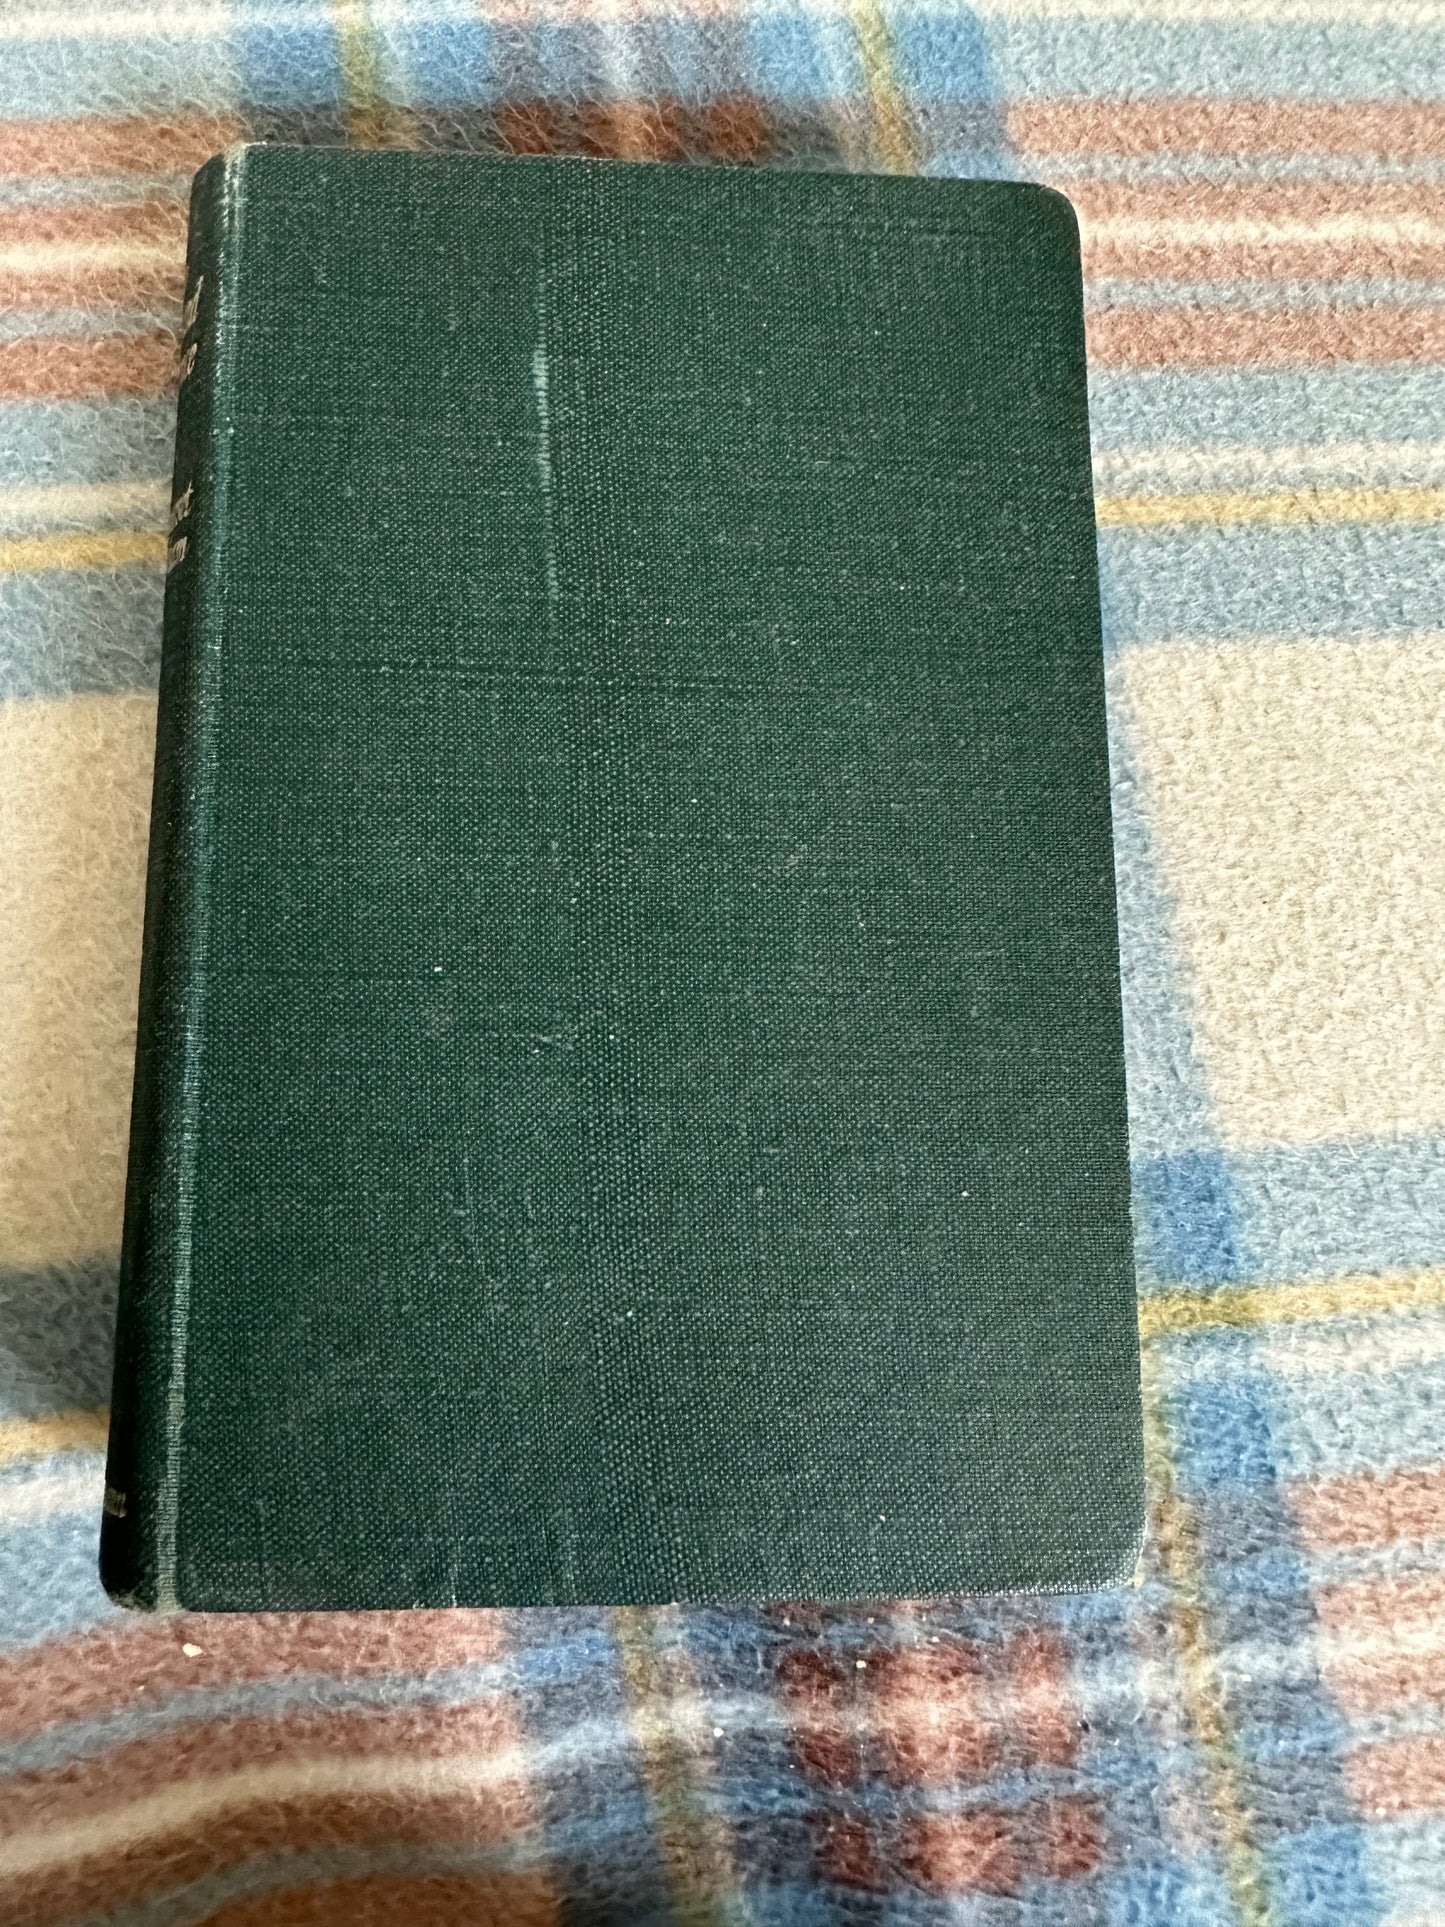 1945 The Moon & Sixpence - W. Somerset Maugham(William Heinemann)